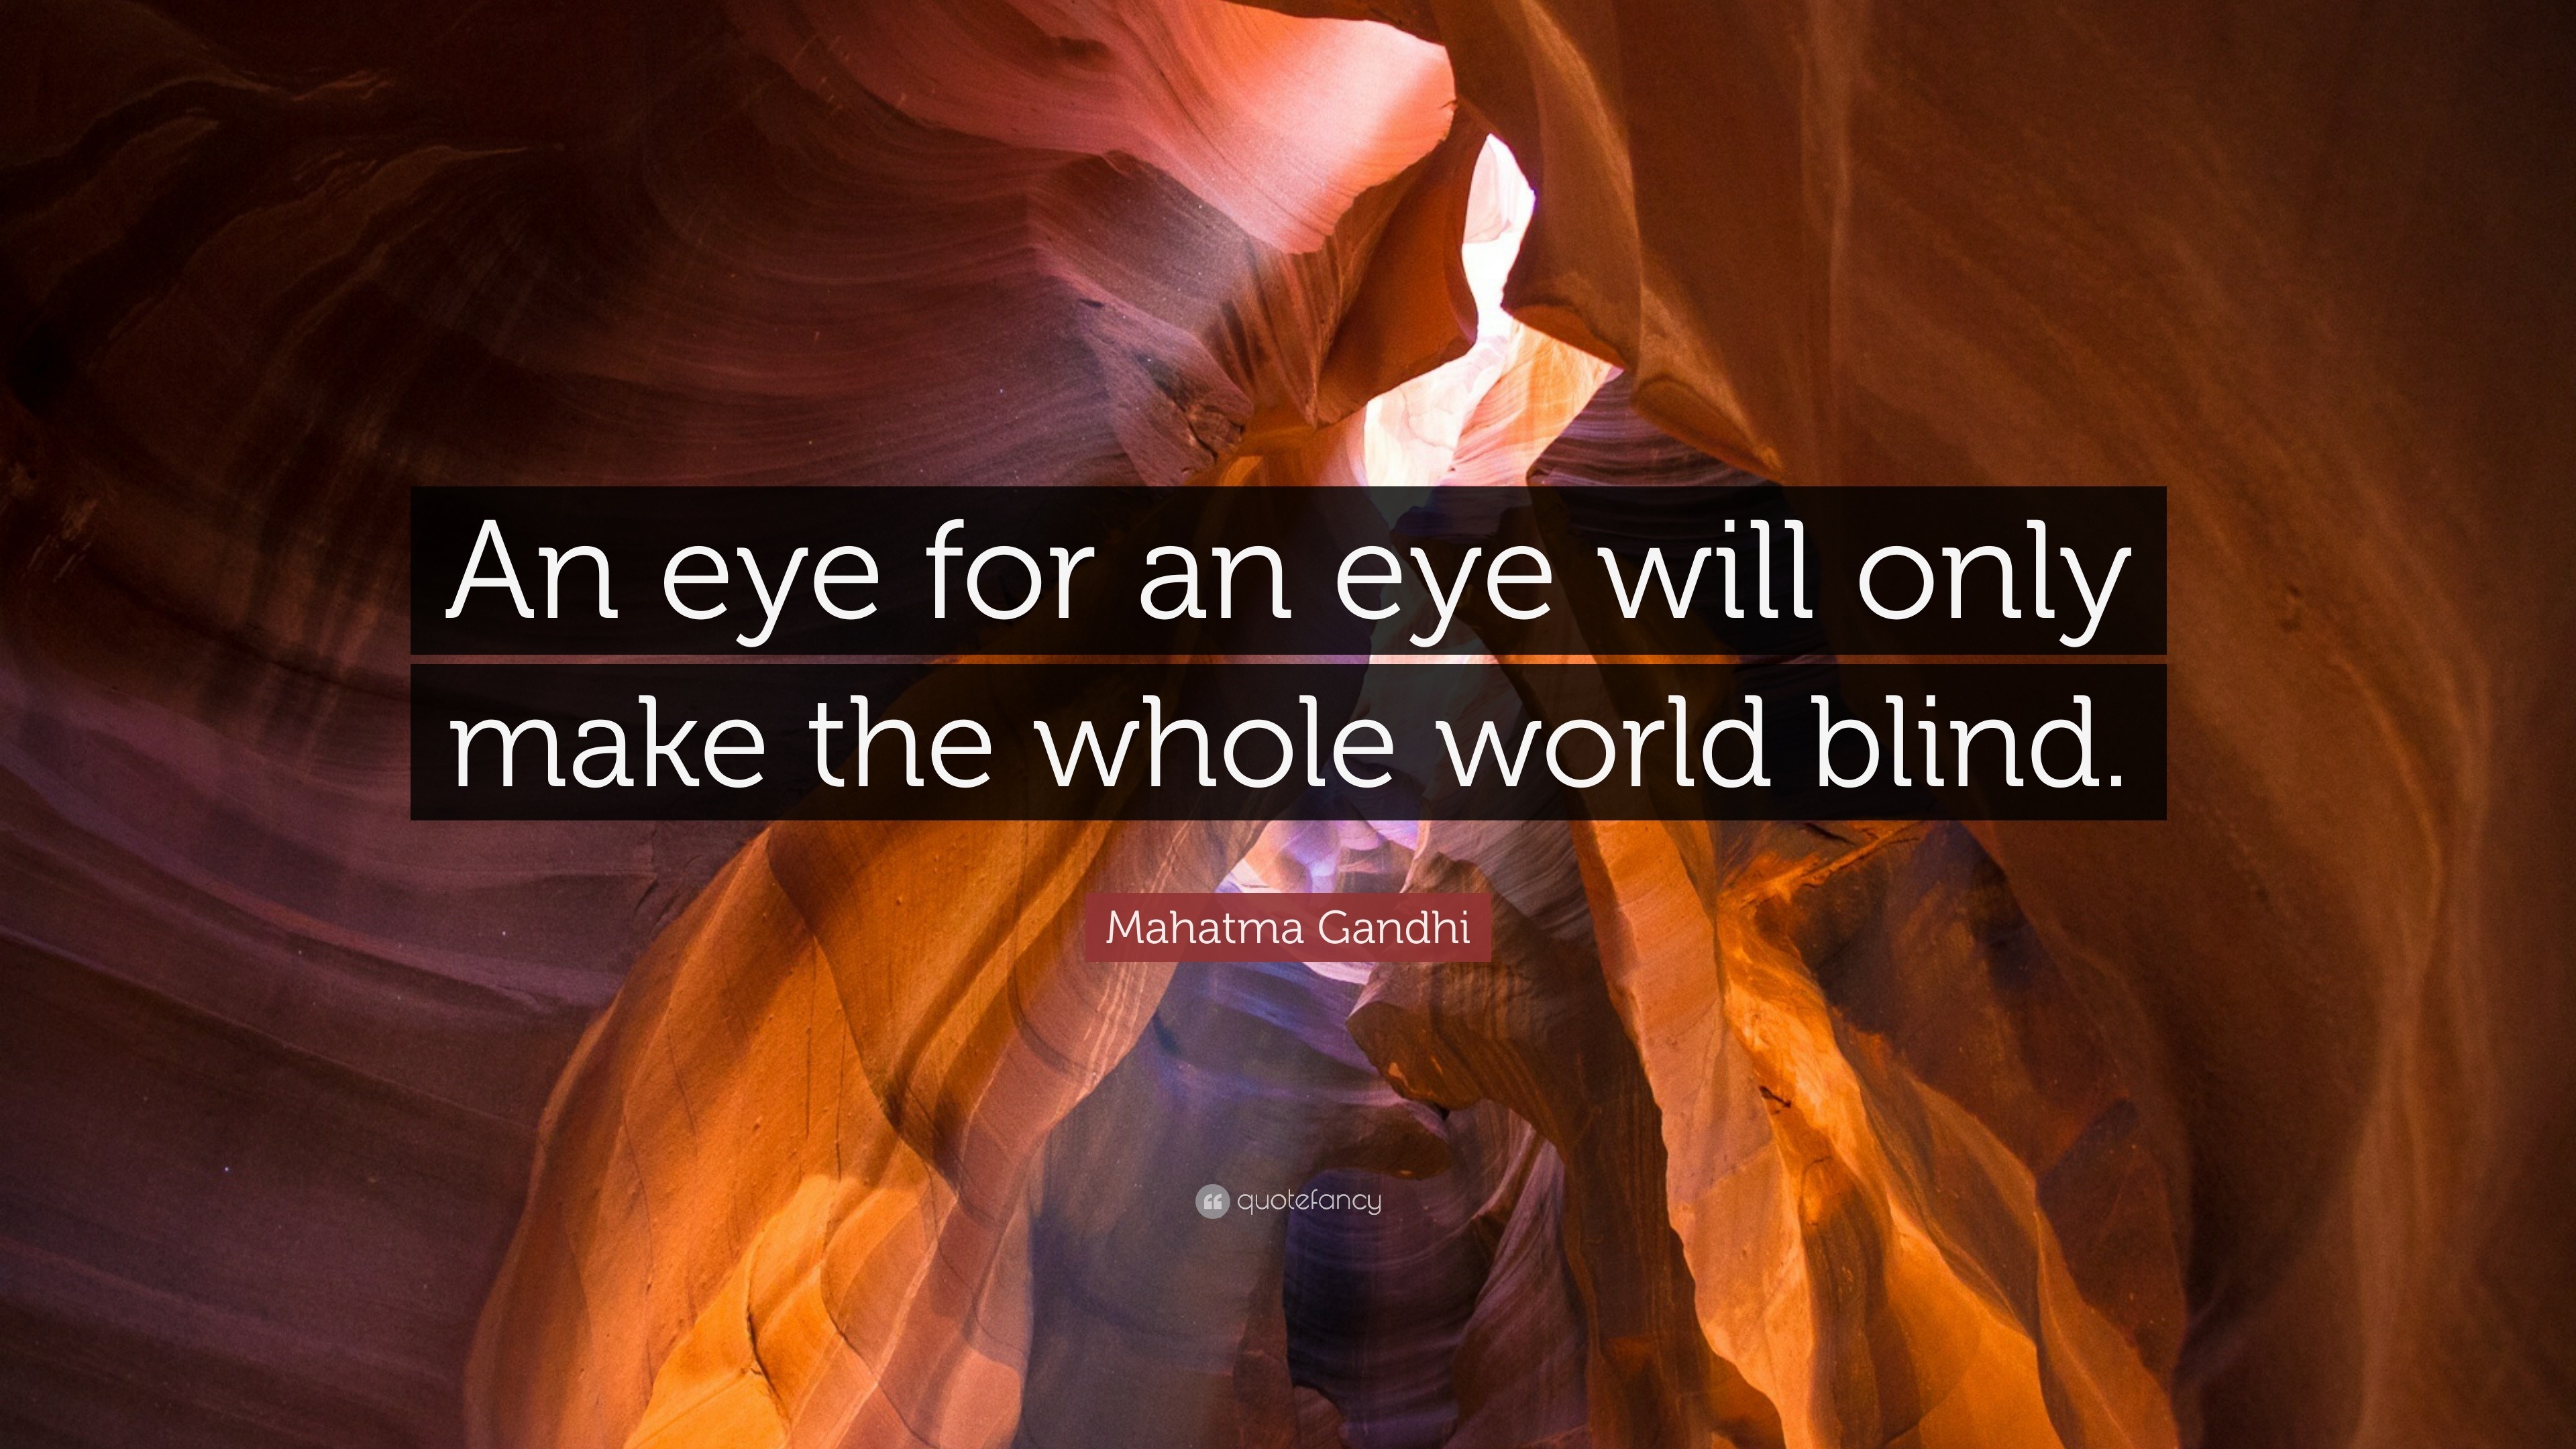 an eye for an eye will leave the whole world blind